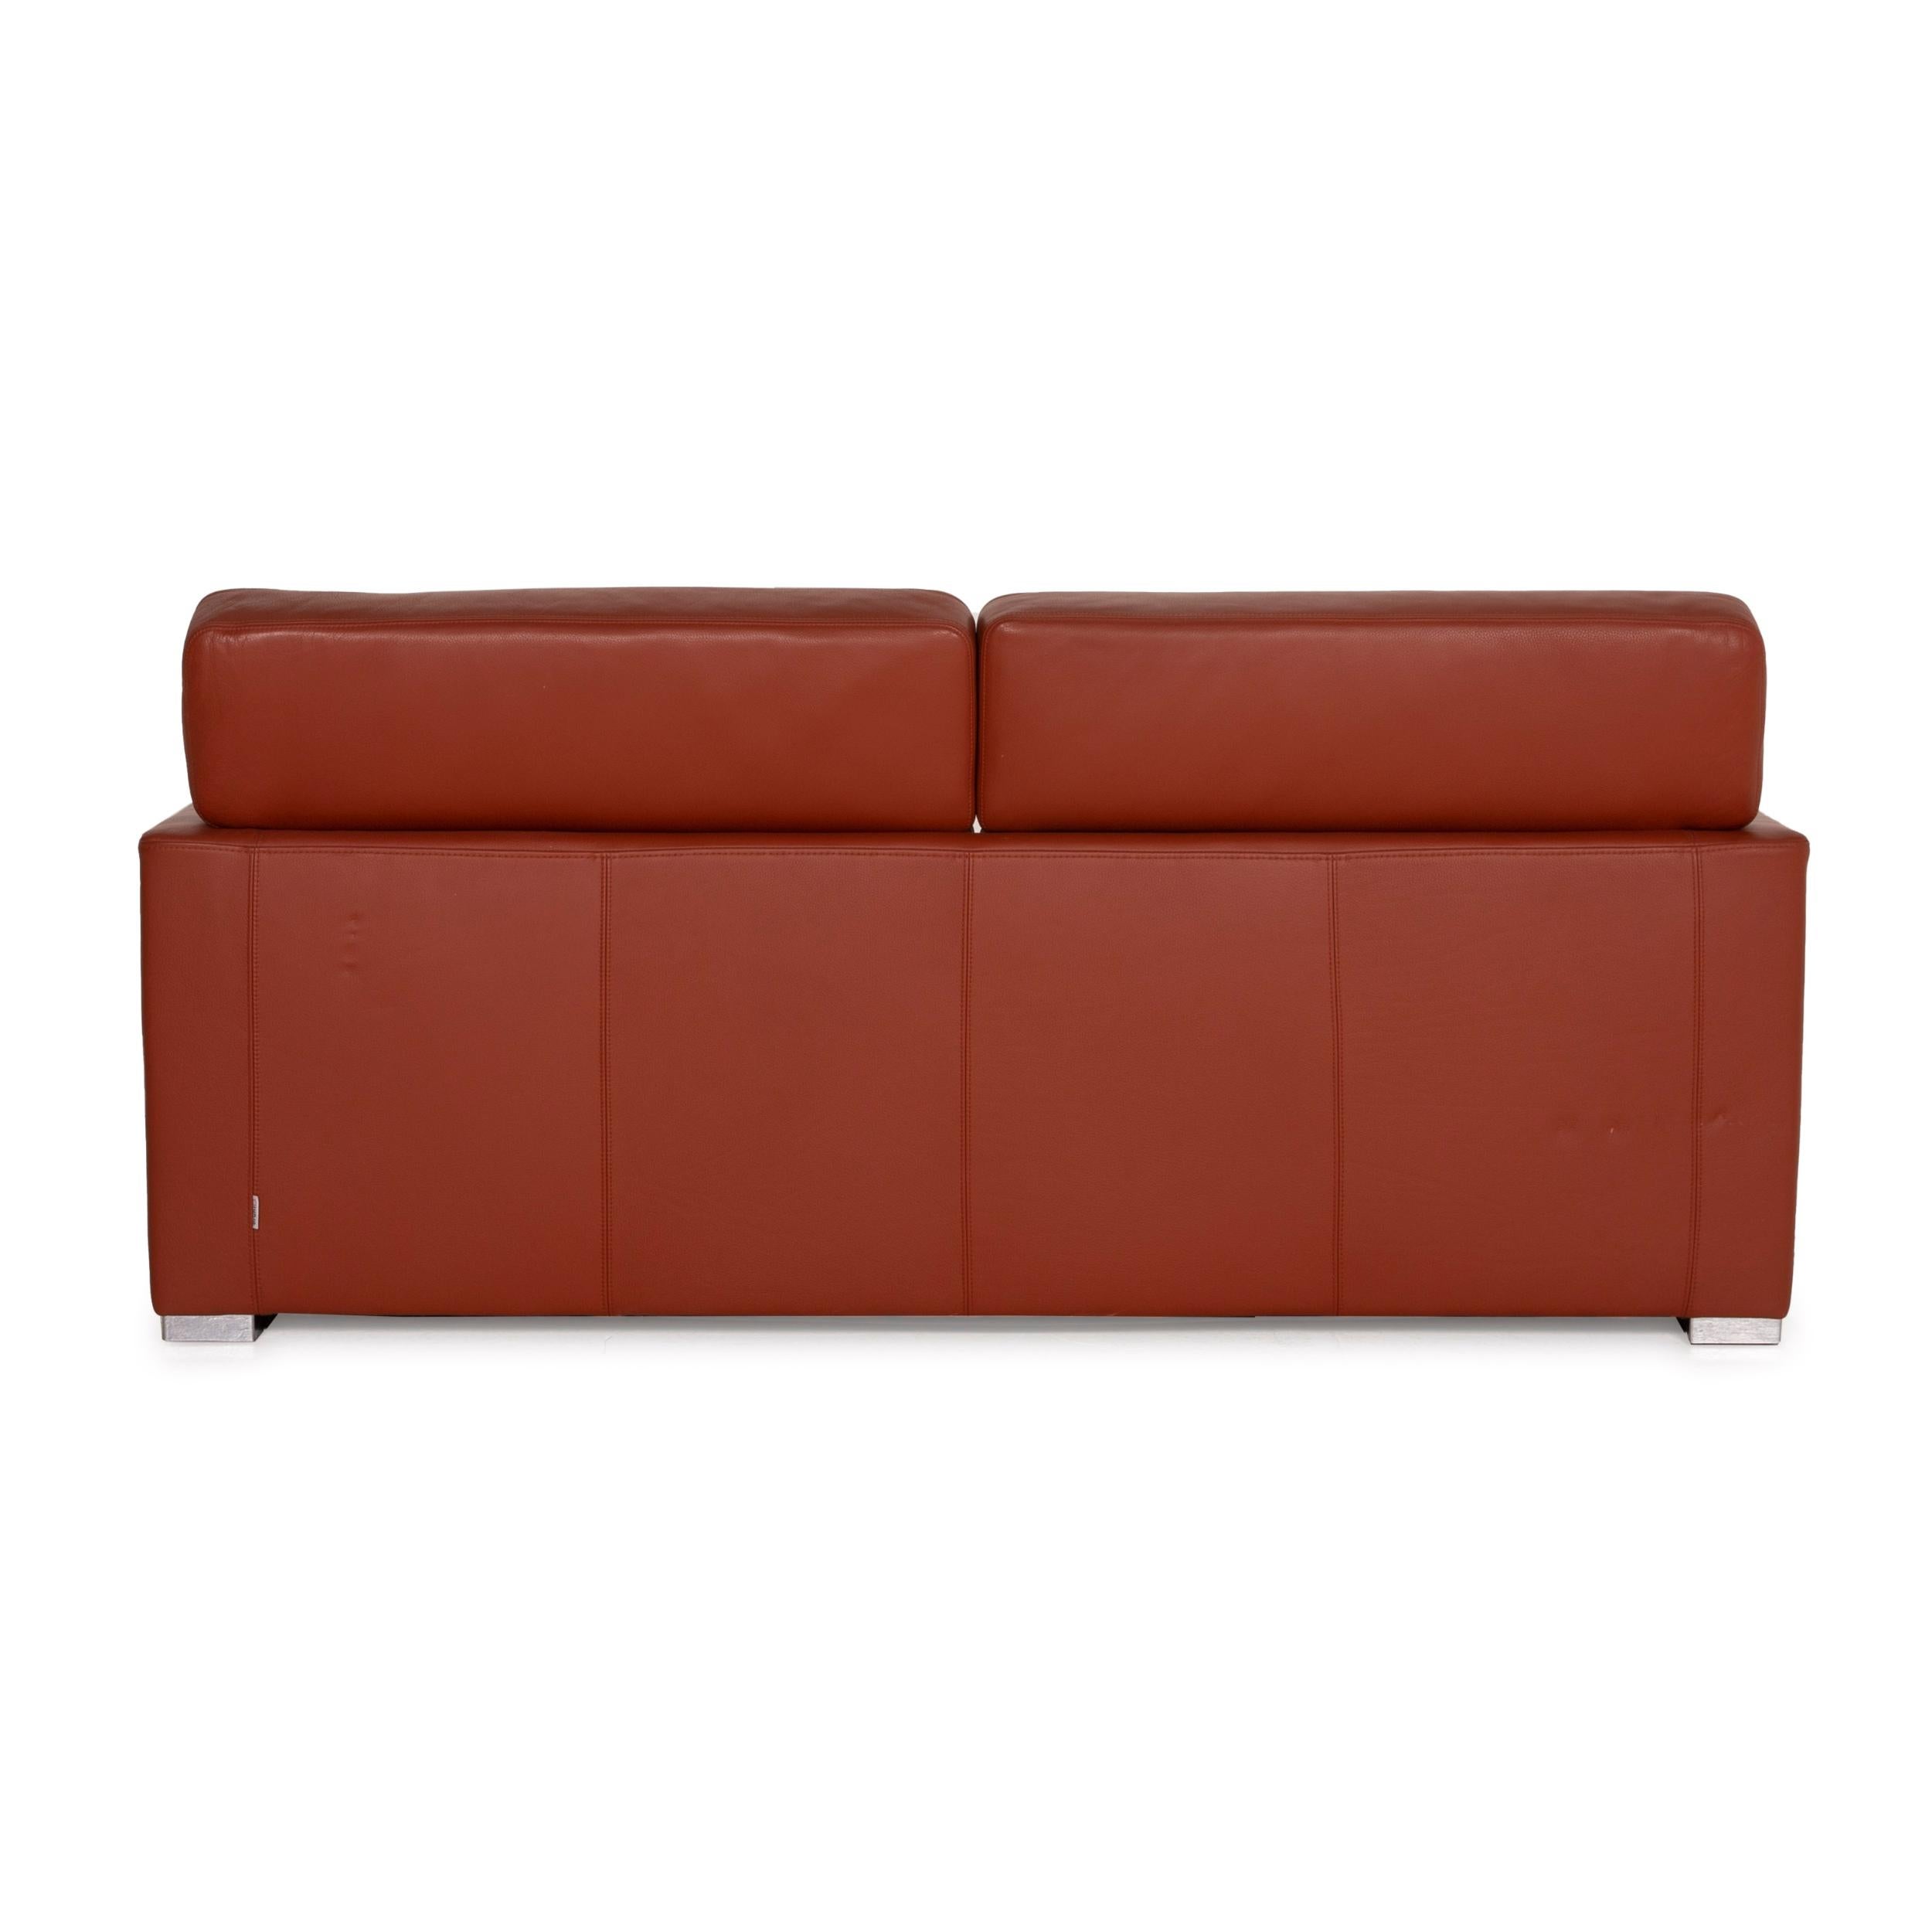 Brühl Collection Separe Leather Sofa Terracotta Three-Seater Function For Sale 5